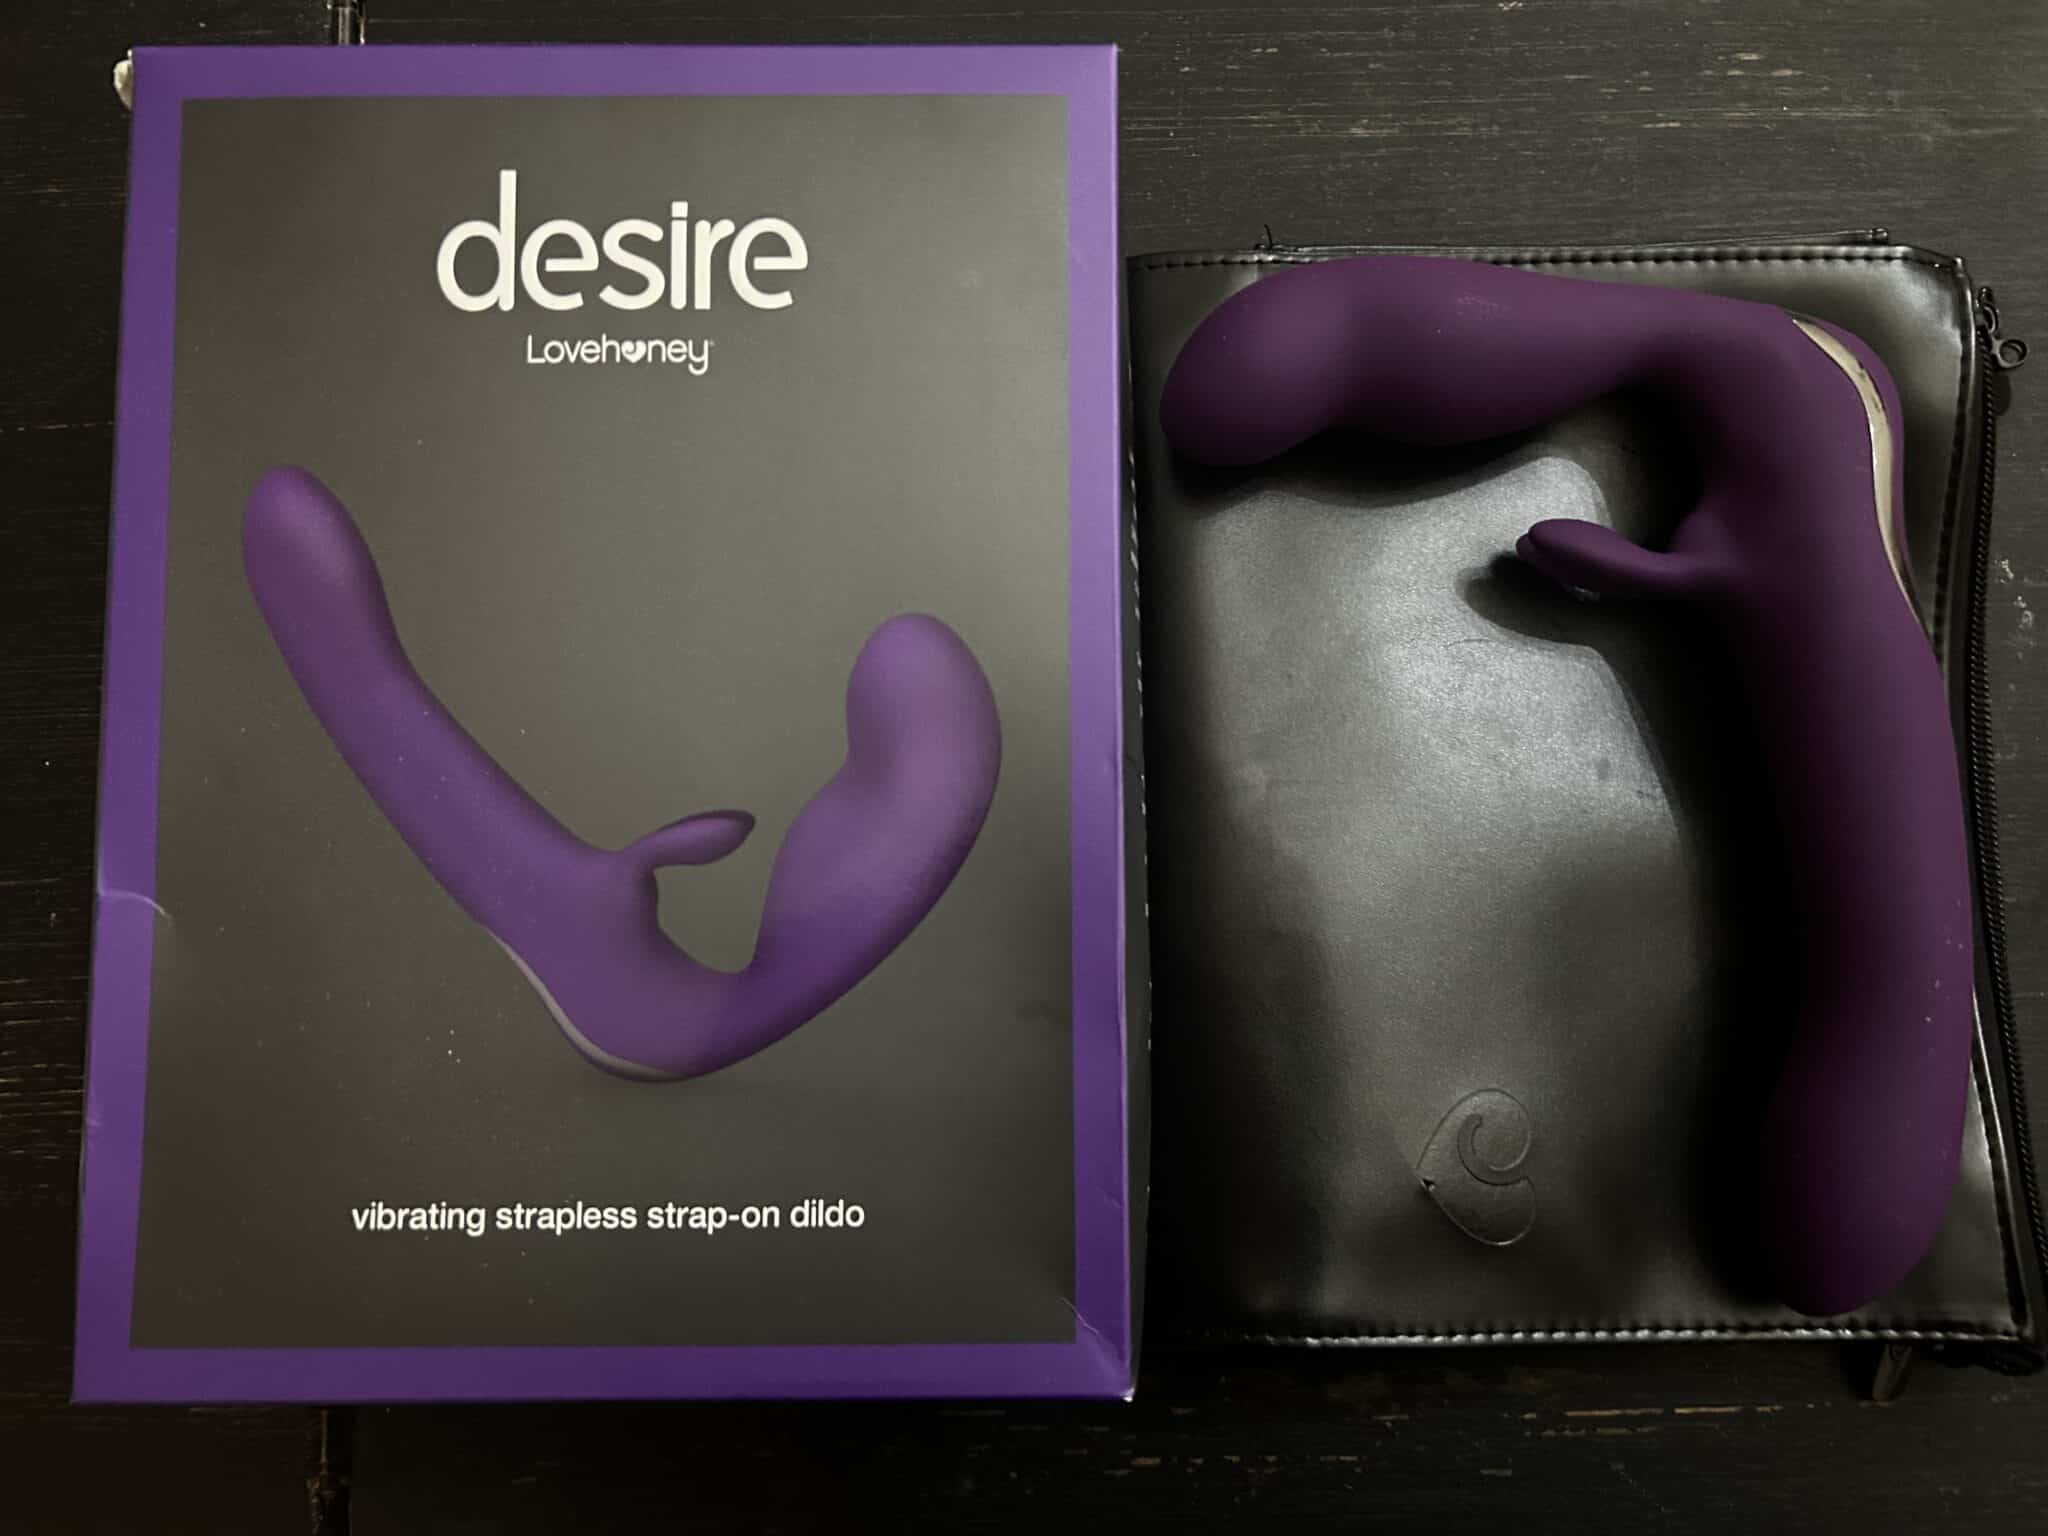 Lovehoney Desire Luxury Strapless Strap-On The Unboxing Experience: A Review